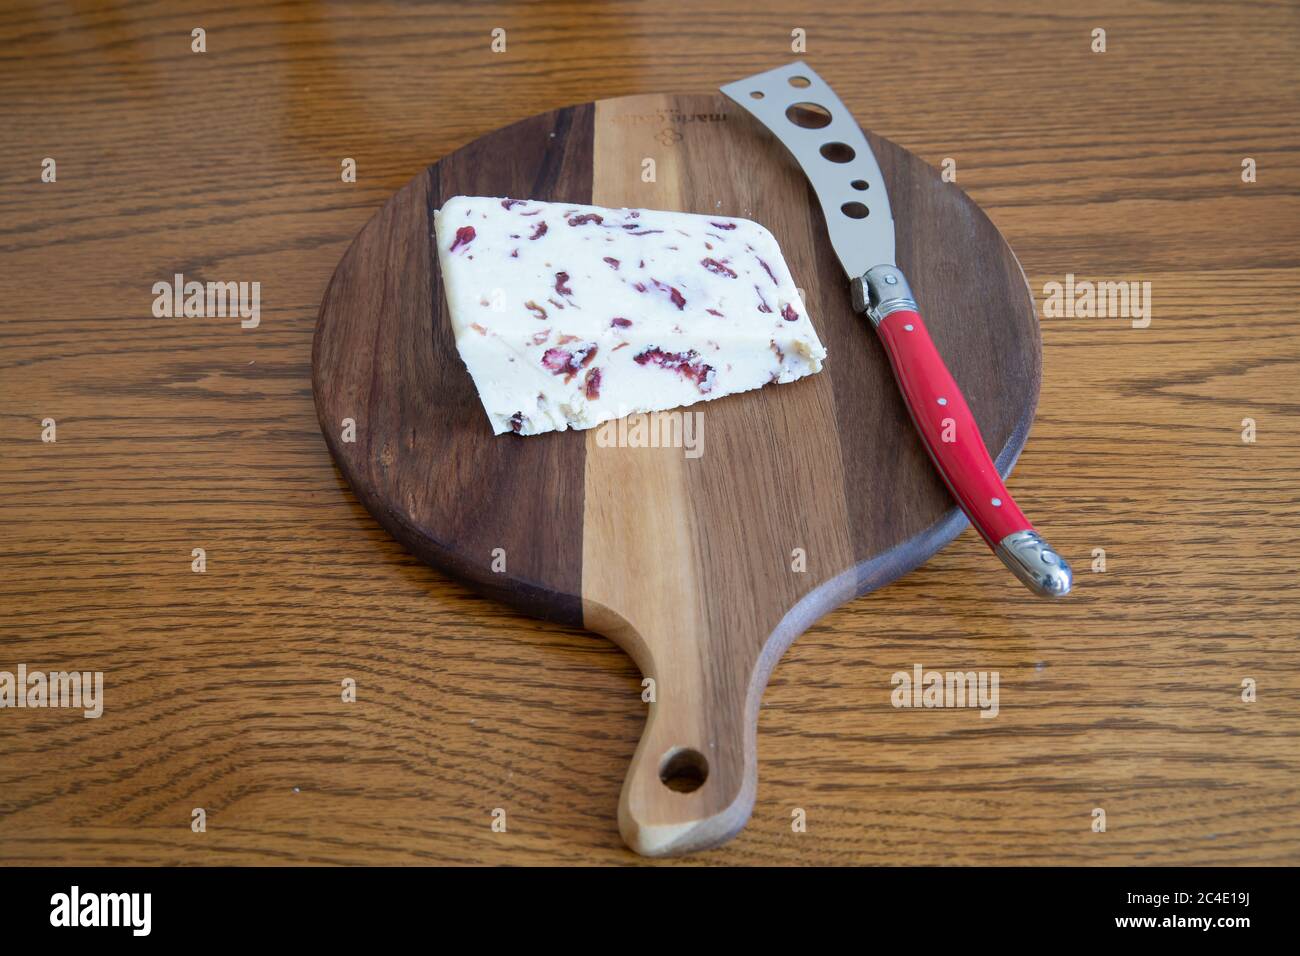 Wensleydale and Cranberry Cheese on a wooden cheeseboard with a red cheese knife Stock Photo